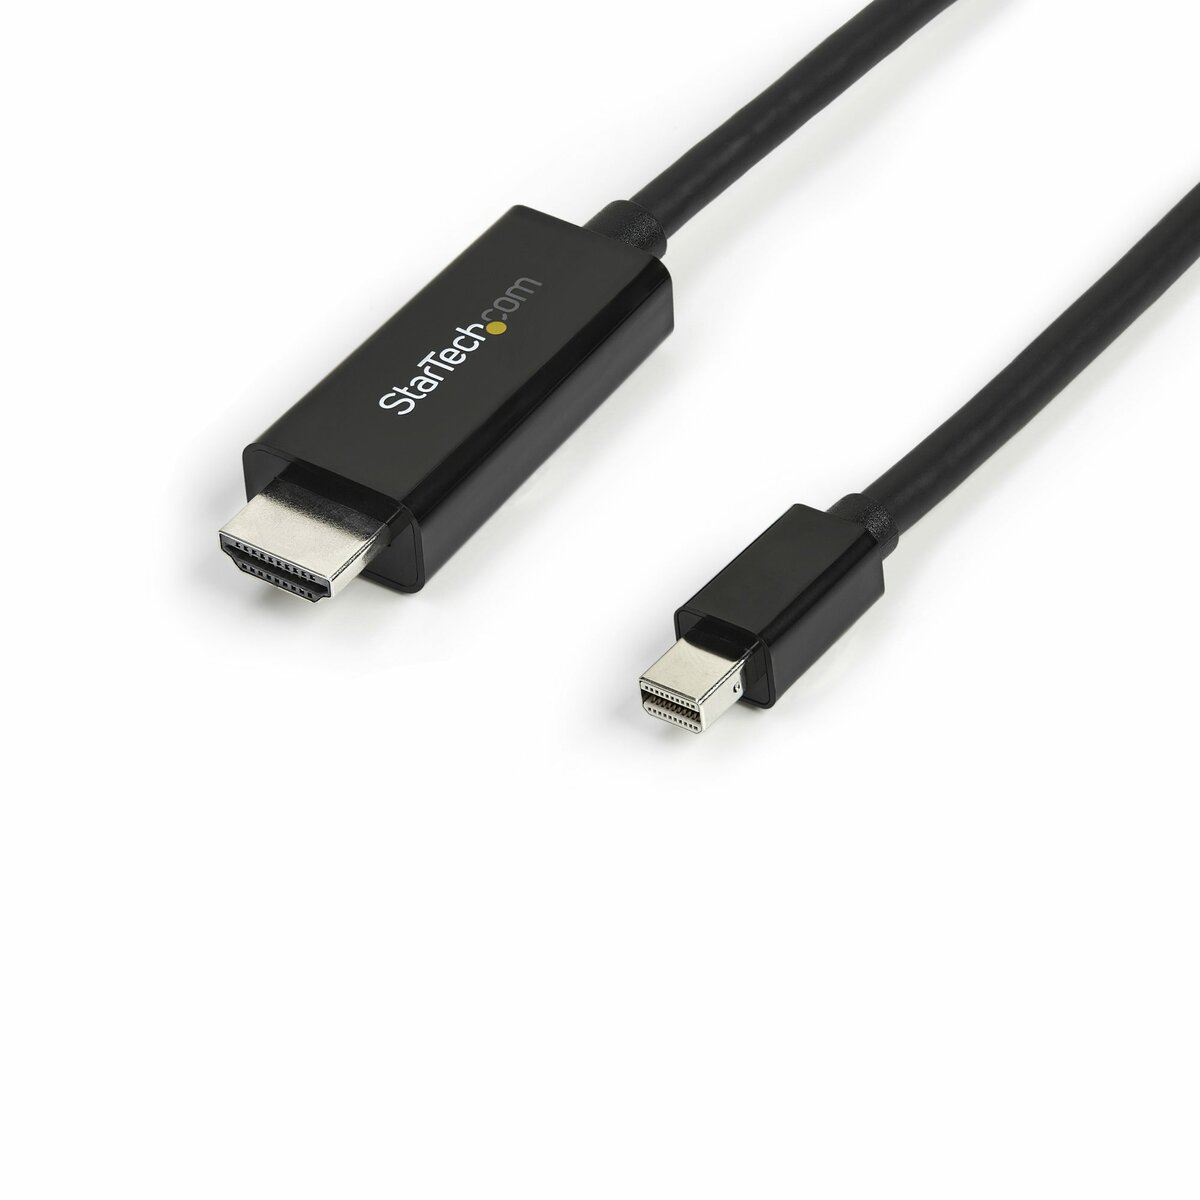 Startech : 3M MINI DP TO DP ADAPTER 3M cable - MDP TO DISPLAYPORT M/M